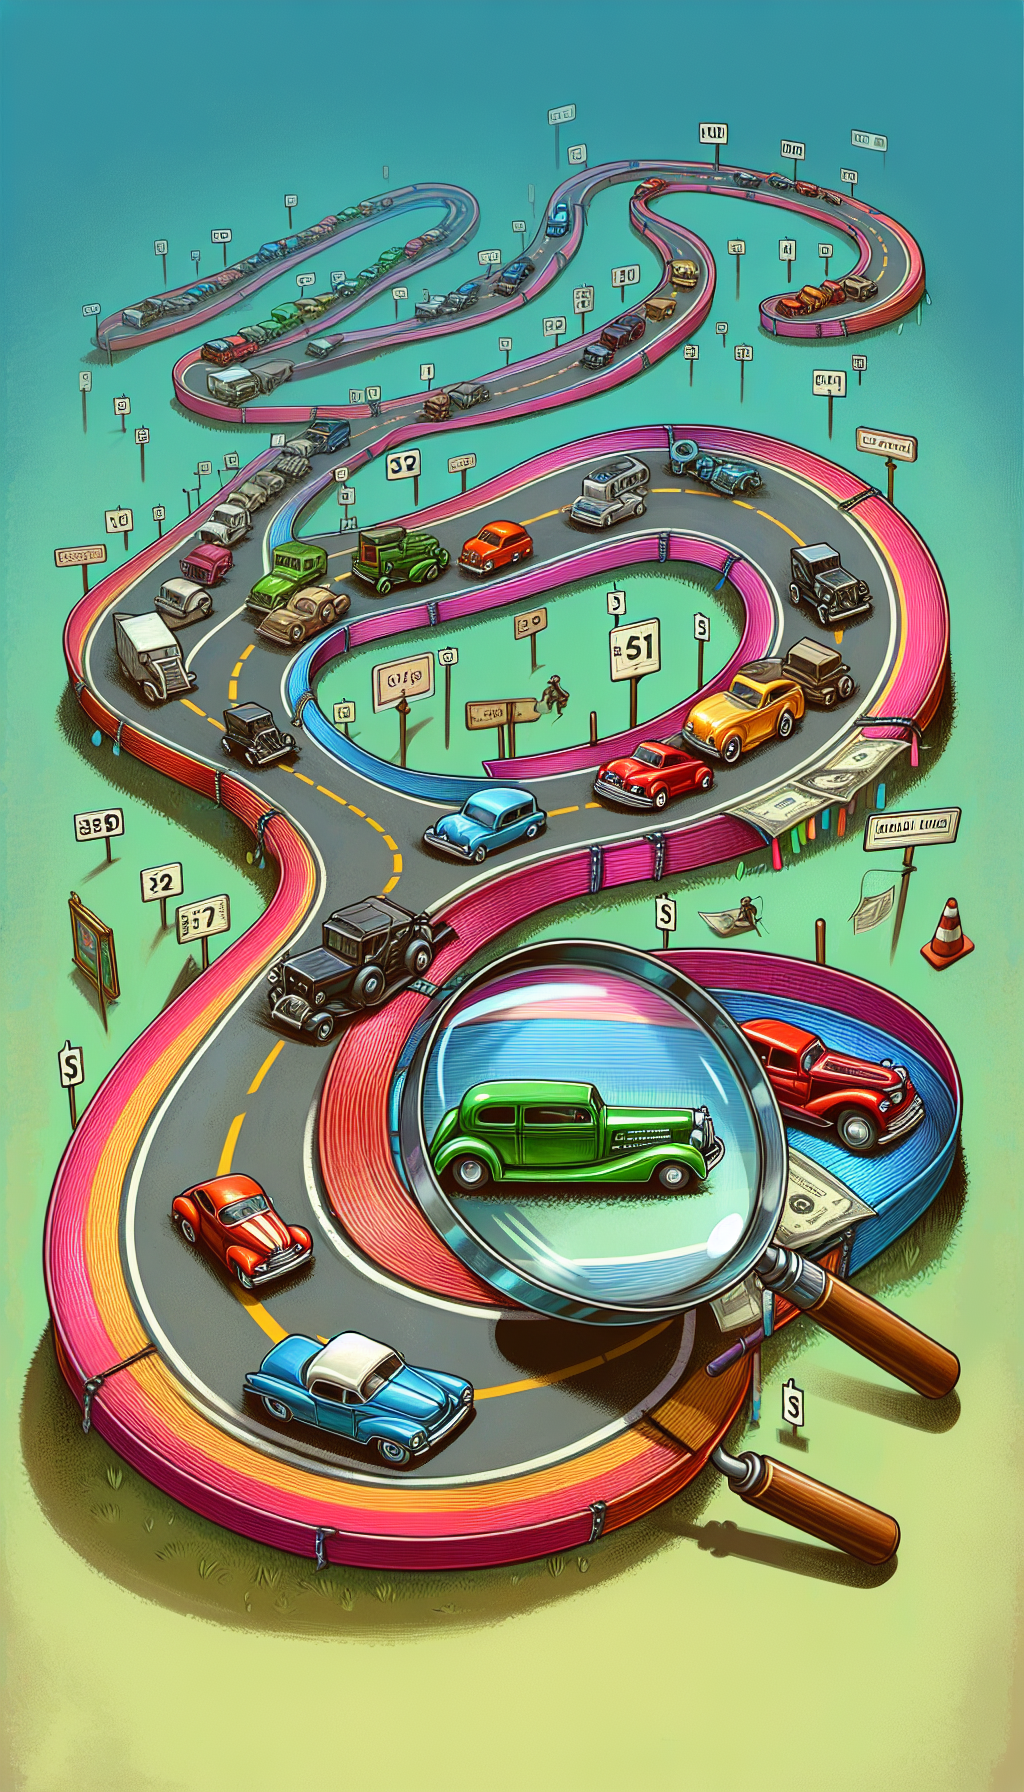 An illustration depicting a colorful, winding road map unfurling like a ribbon with various stops labeled as vintage stores, flea markets, and online auction sites. Vintage matchbox cars journey along the route, increasing in size and detail (value) as they near the end, where a giant magnifying glass highlights their price tags at a bustling collectors' market.